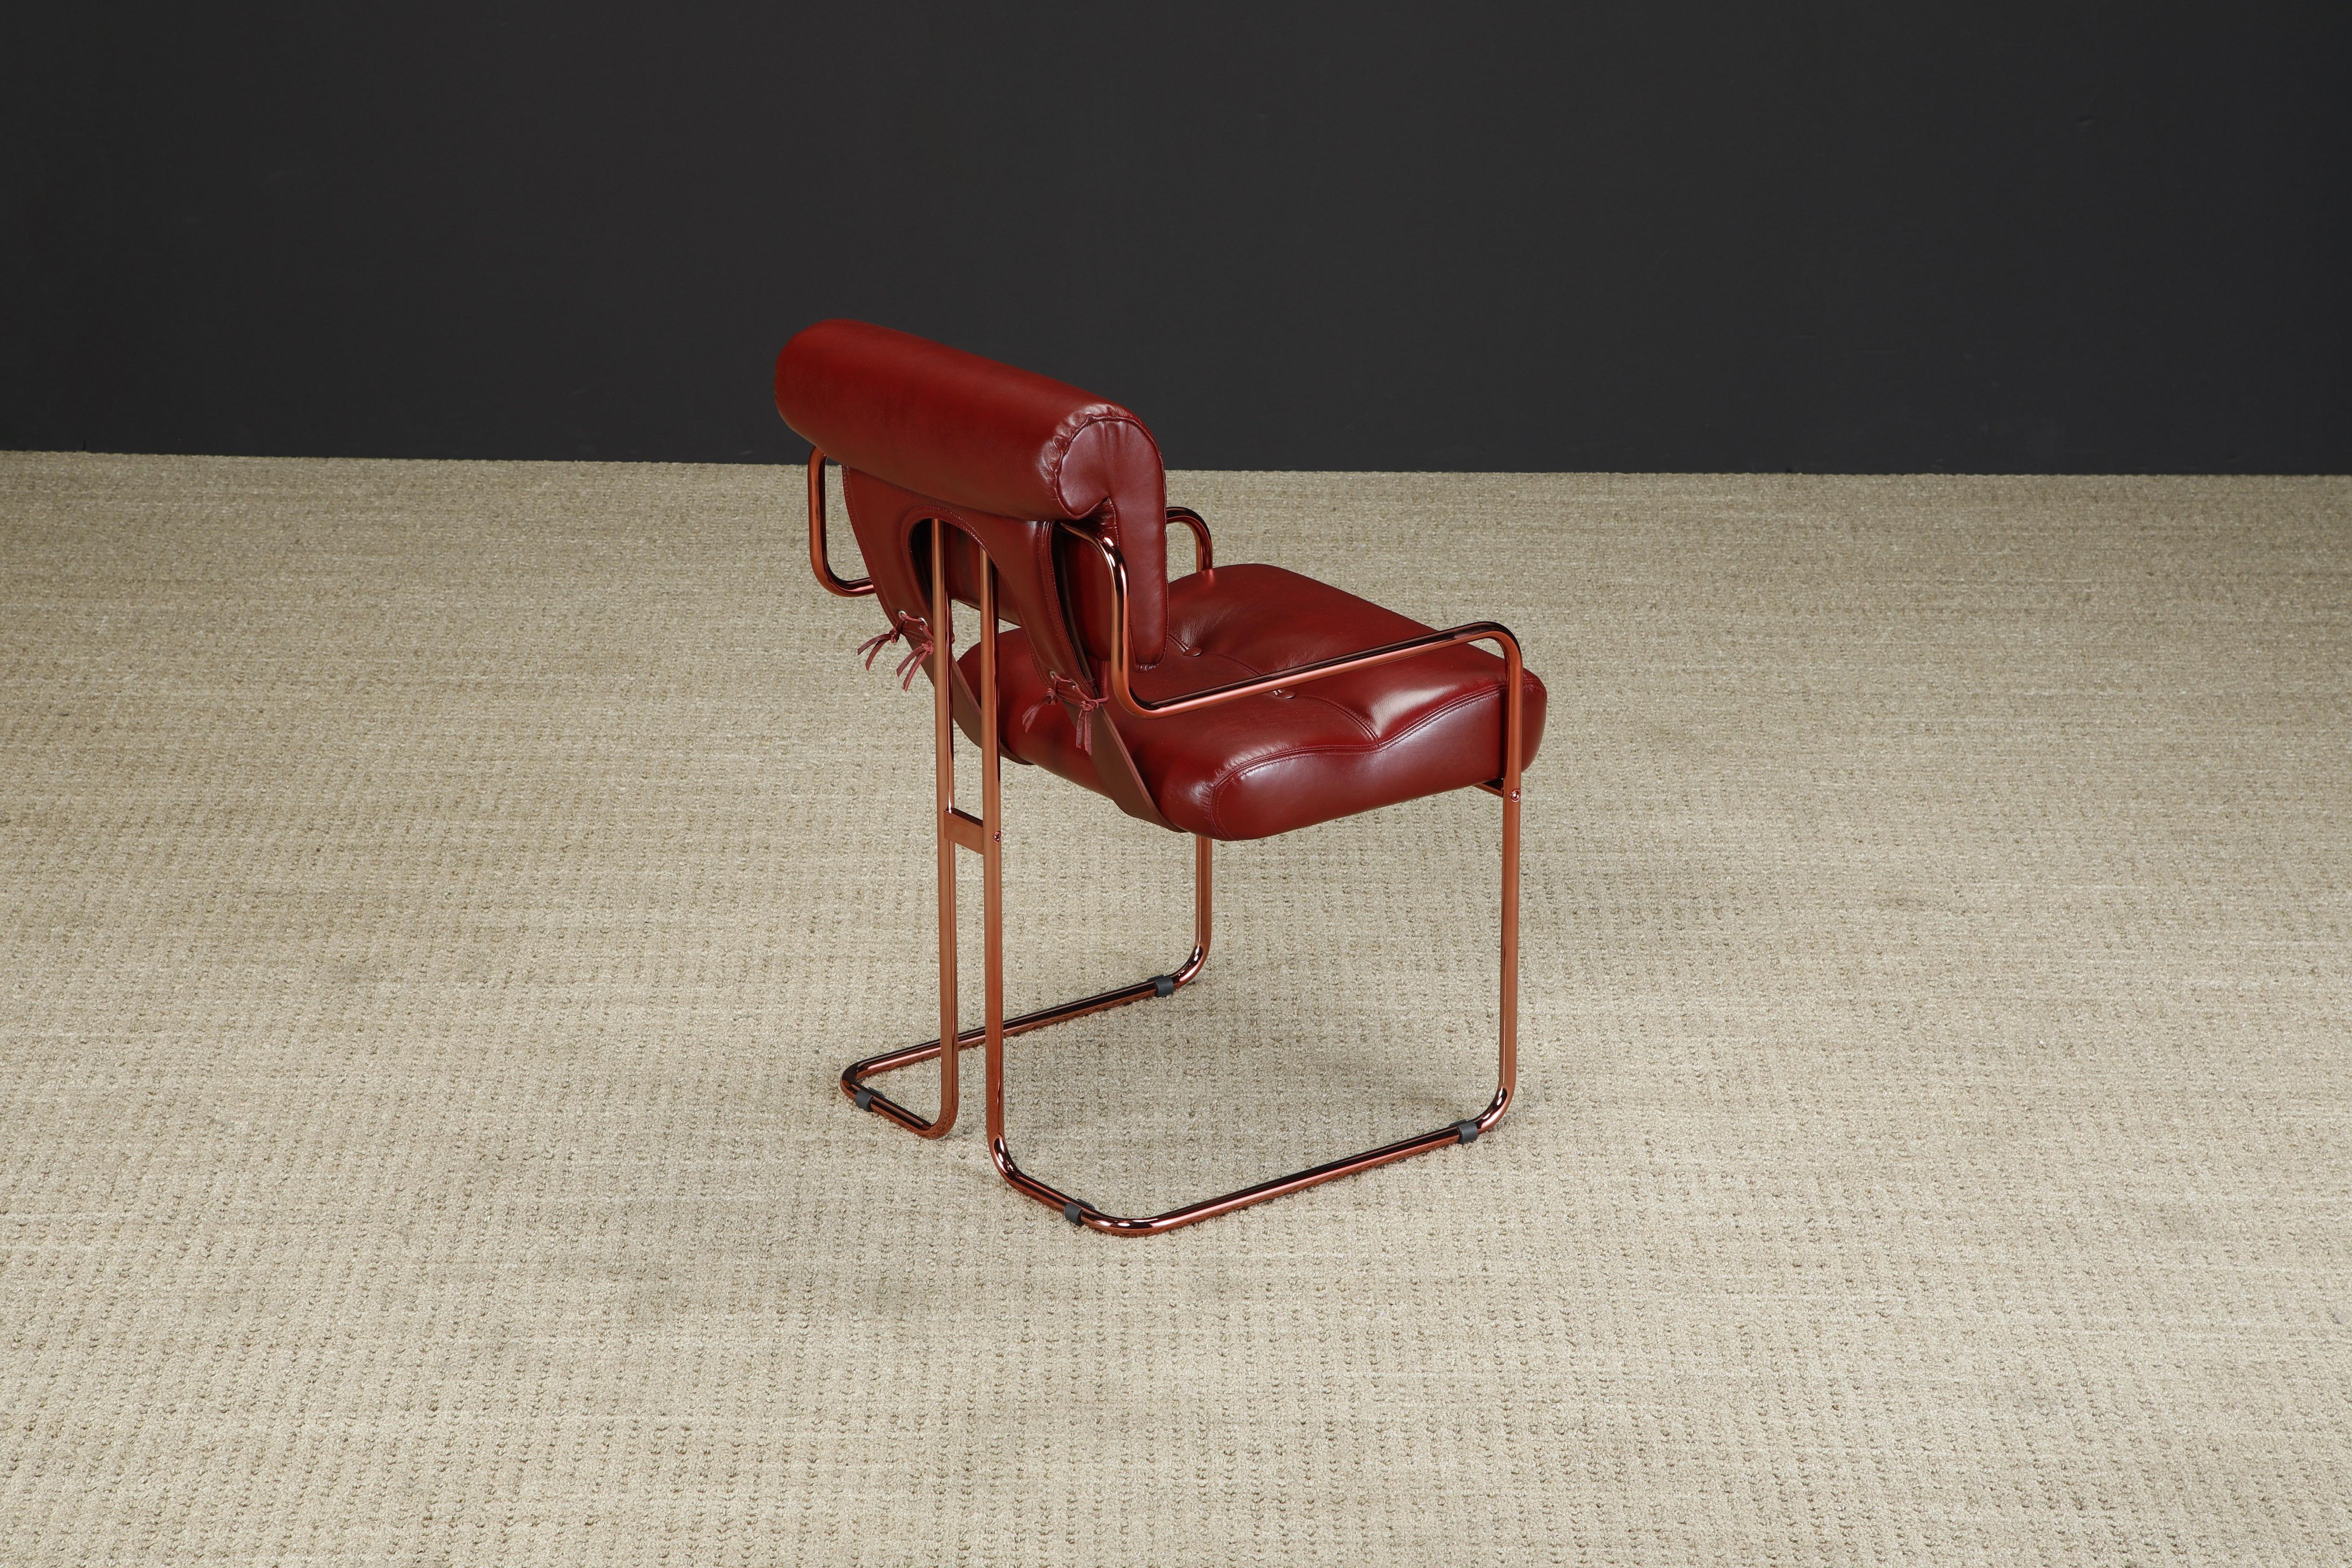 Steel 50th Year Anniversary 'Tucroma' Armchair by Guido Faleschini for Mariani, New